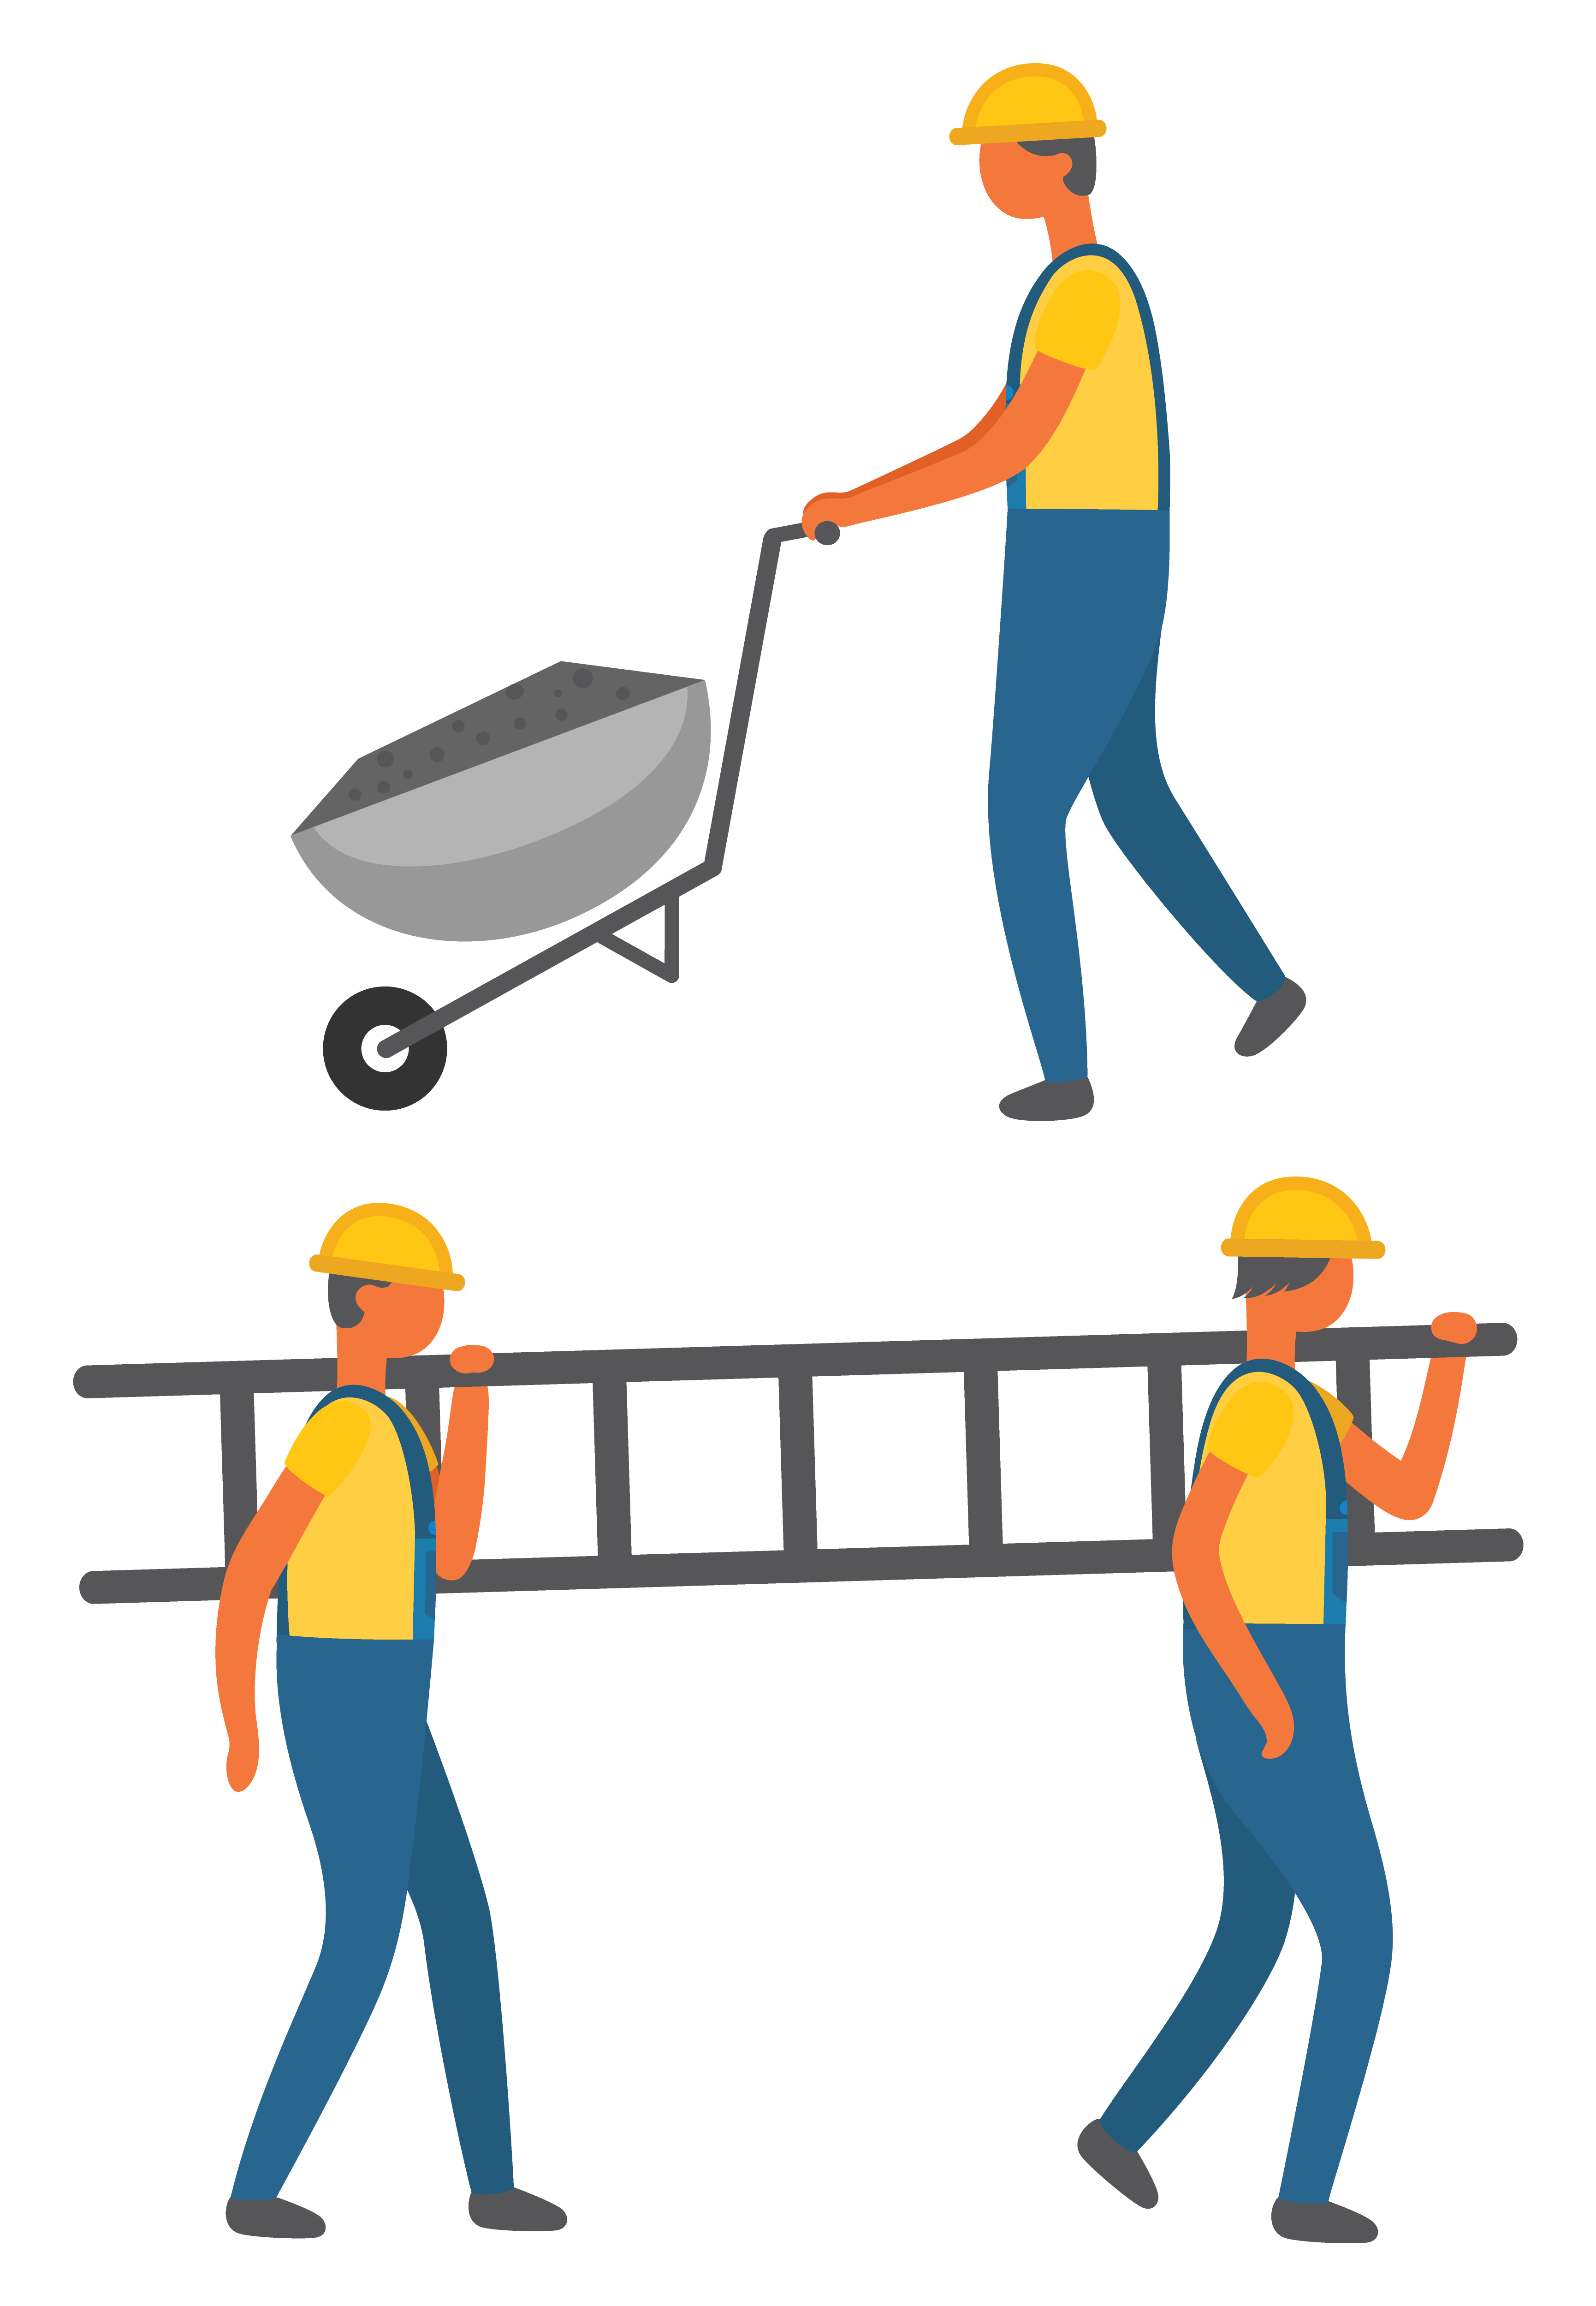 People working in team vector, workers with ladder and cart for materials transportation. Man wearing helmet and uniform. Builders at work flat style. Handymen Working in Team Cart and Ladder Equipment